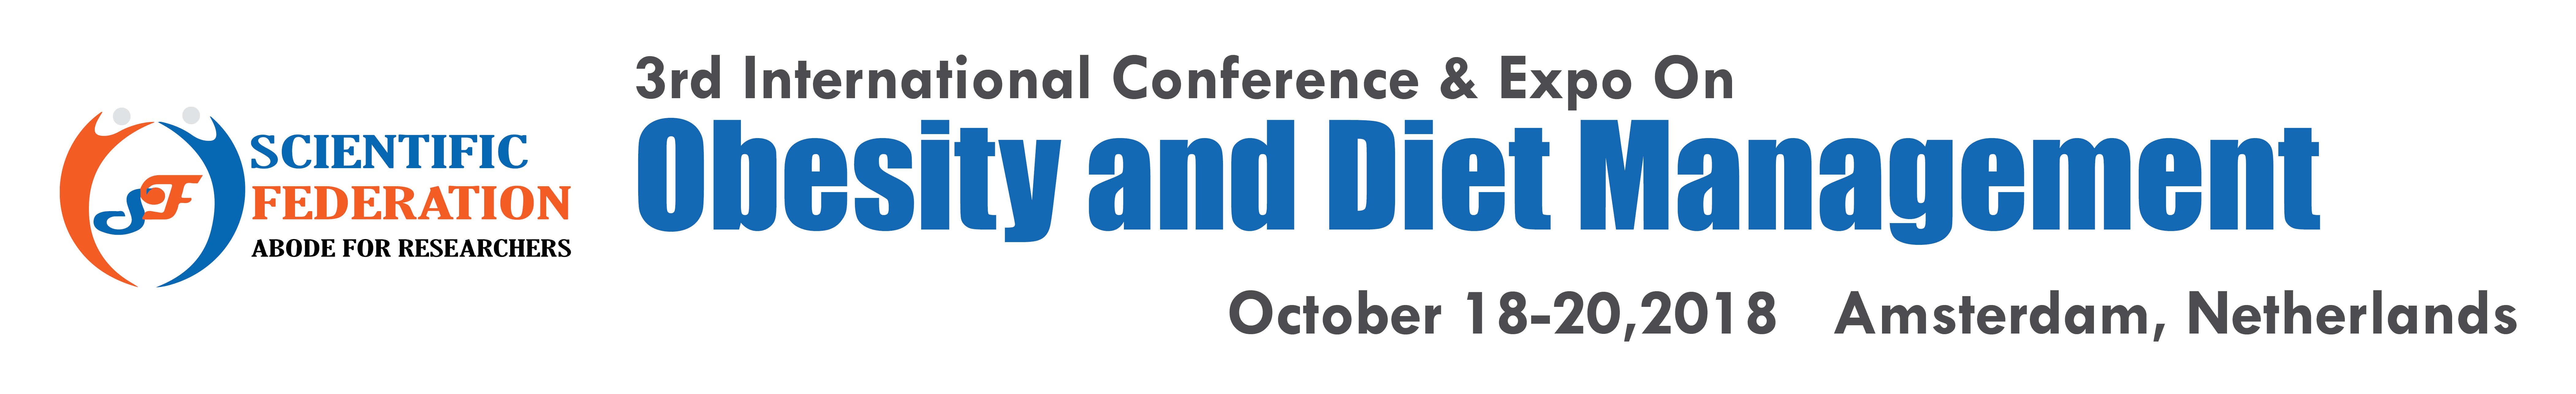 3rd International Conference & Expo on Obesity and Diet Management